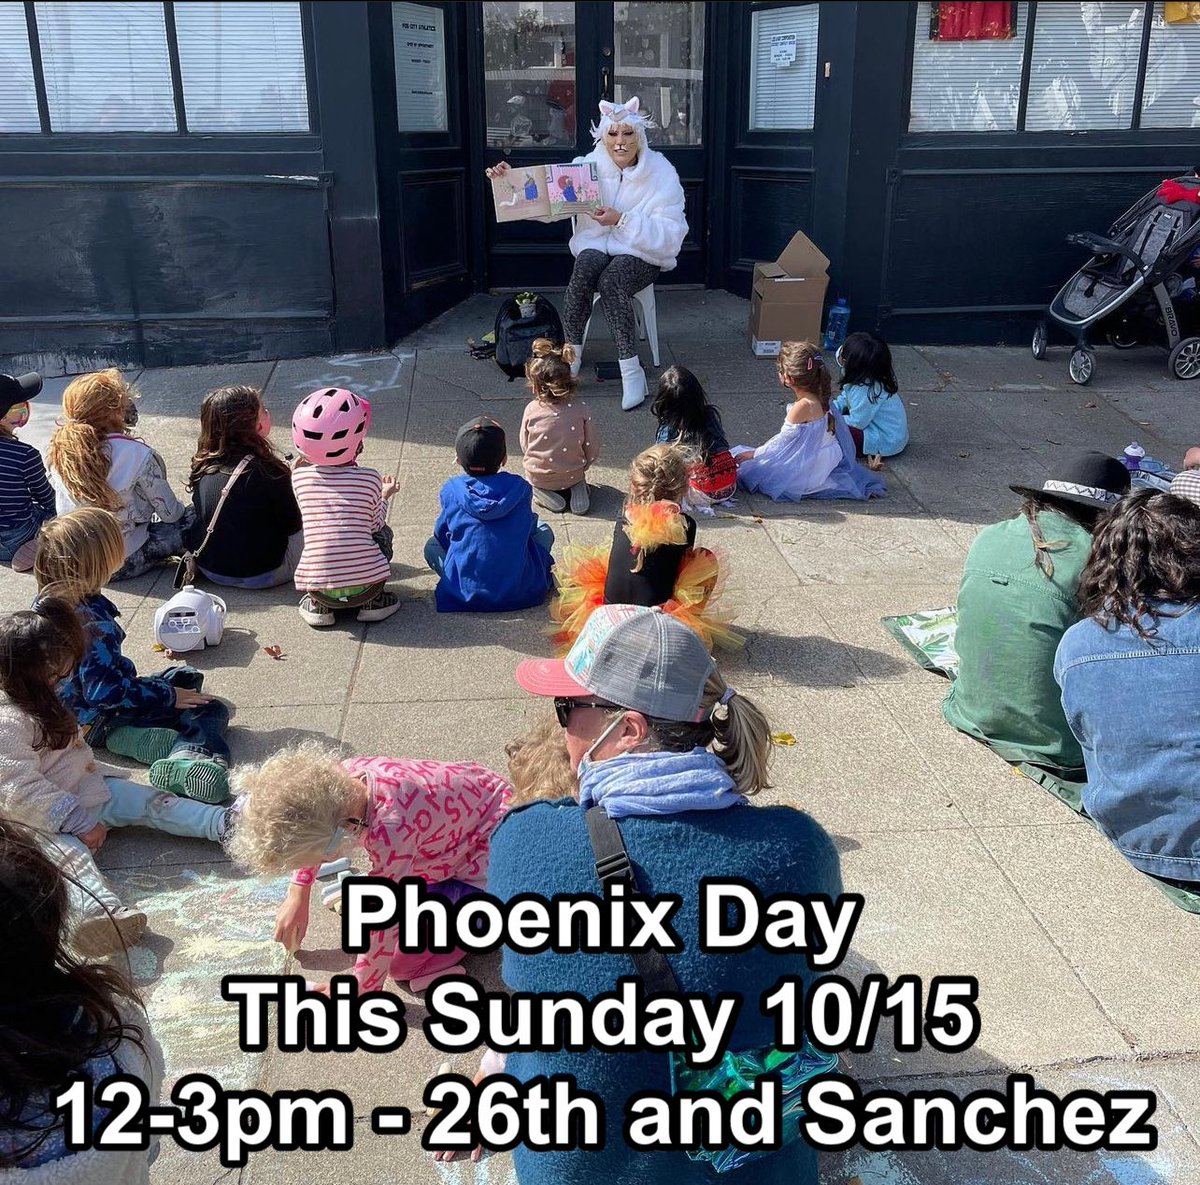 Just a reminder that Phoenix day is this Sunday 12-3 with bouncy castle, succulent bar, live music and tons of other activities. See you there!